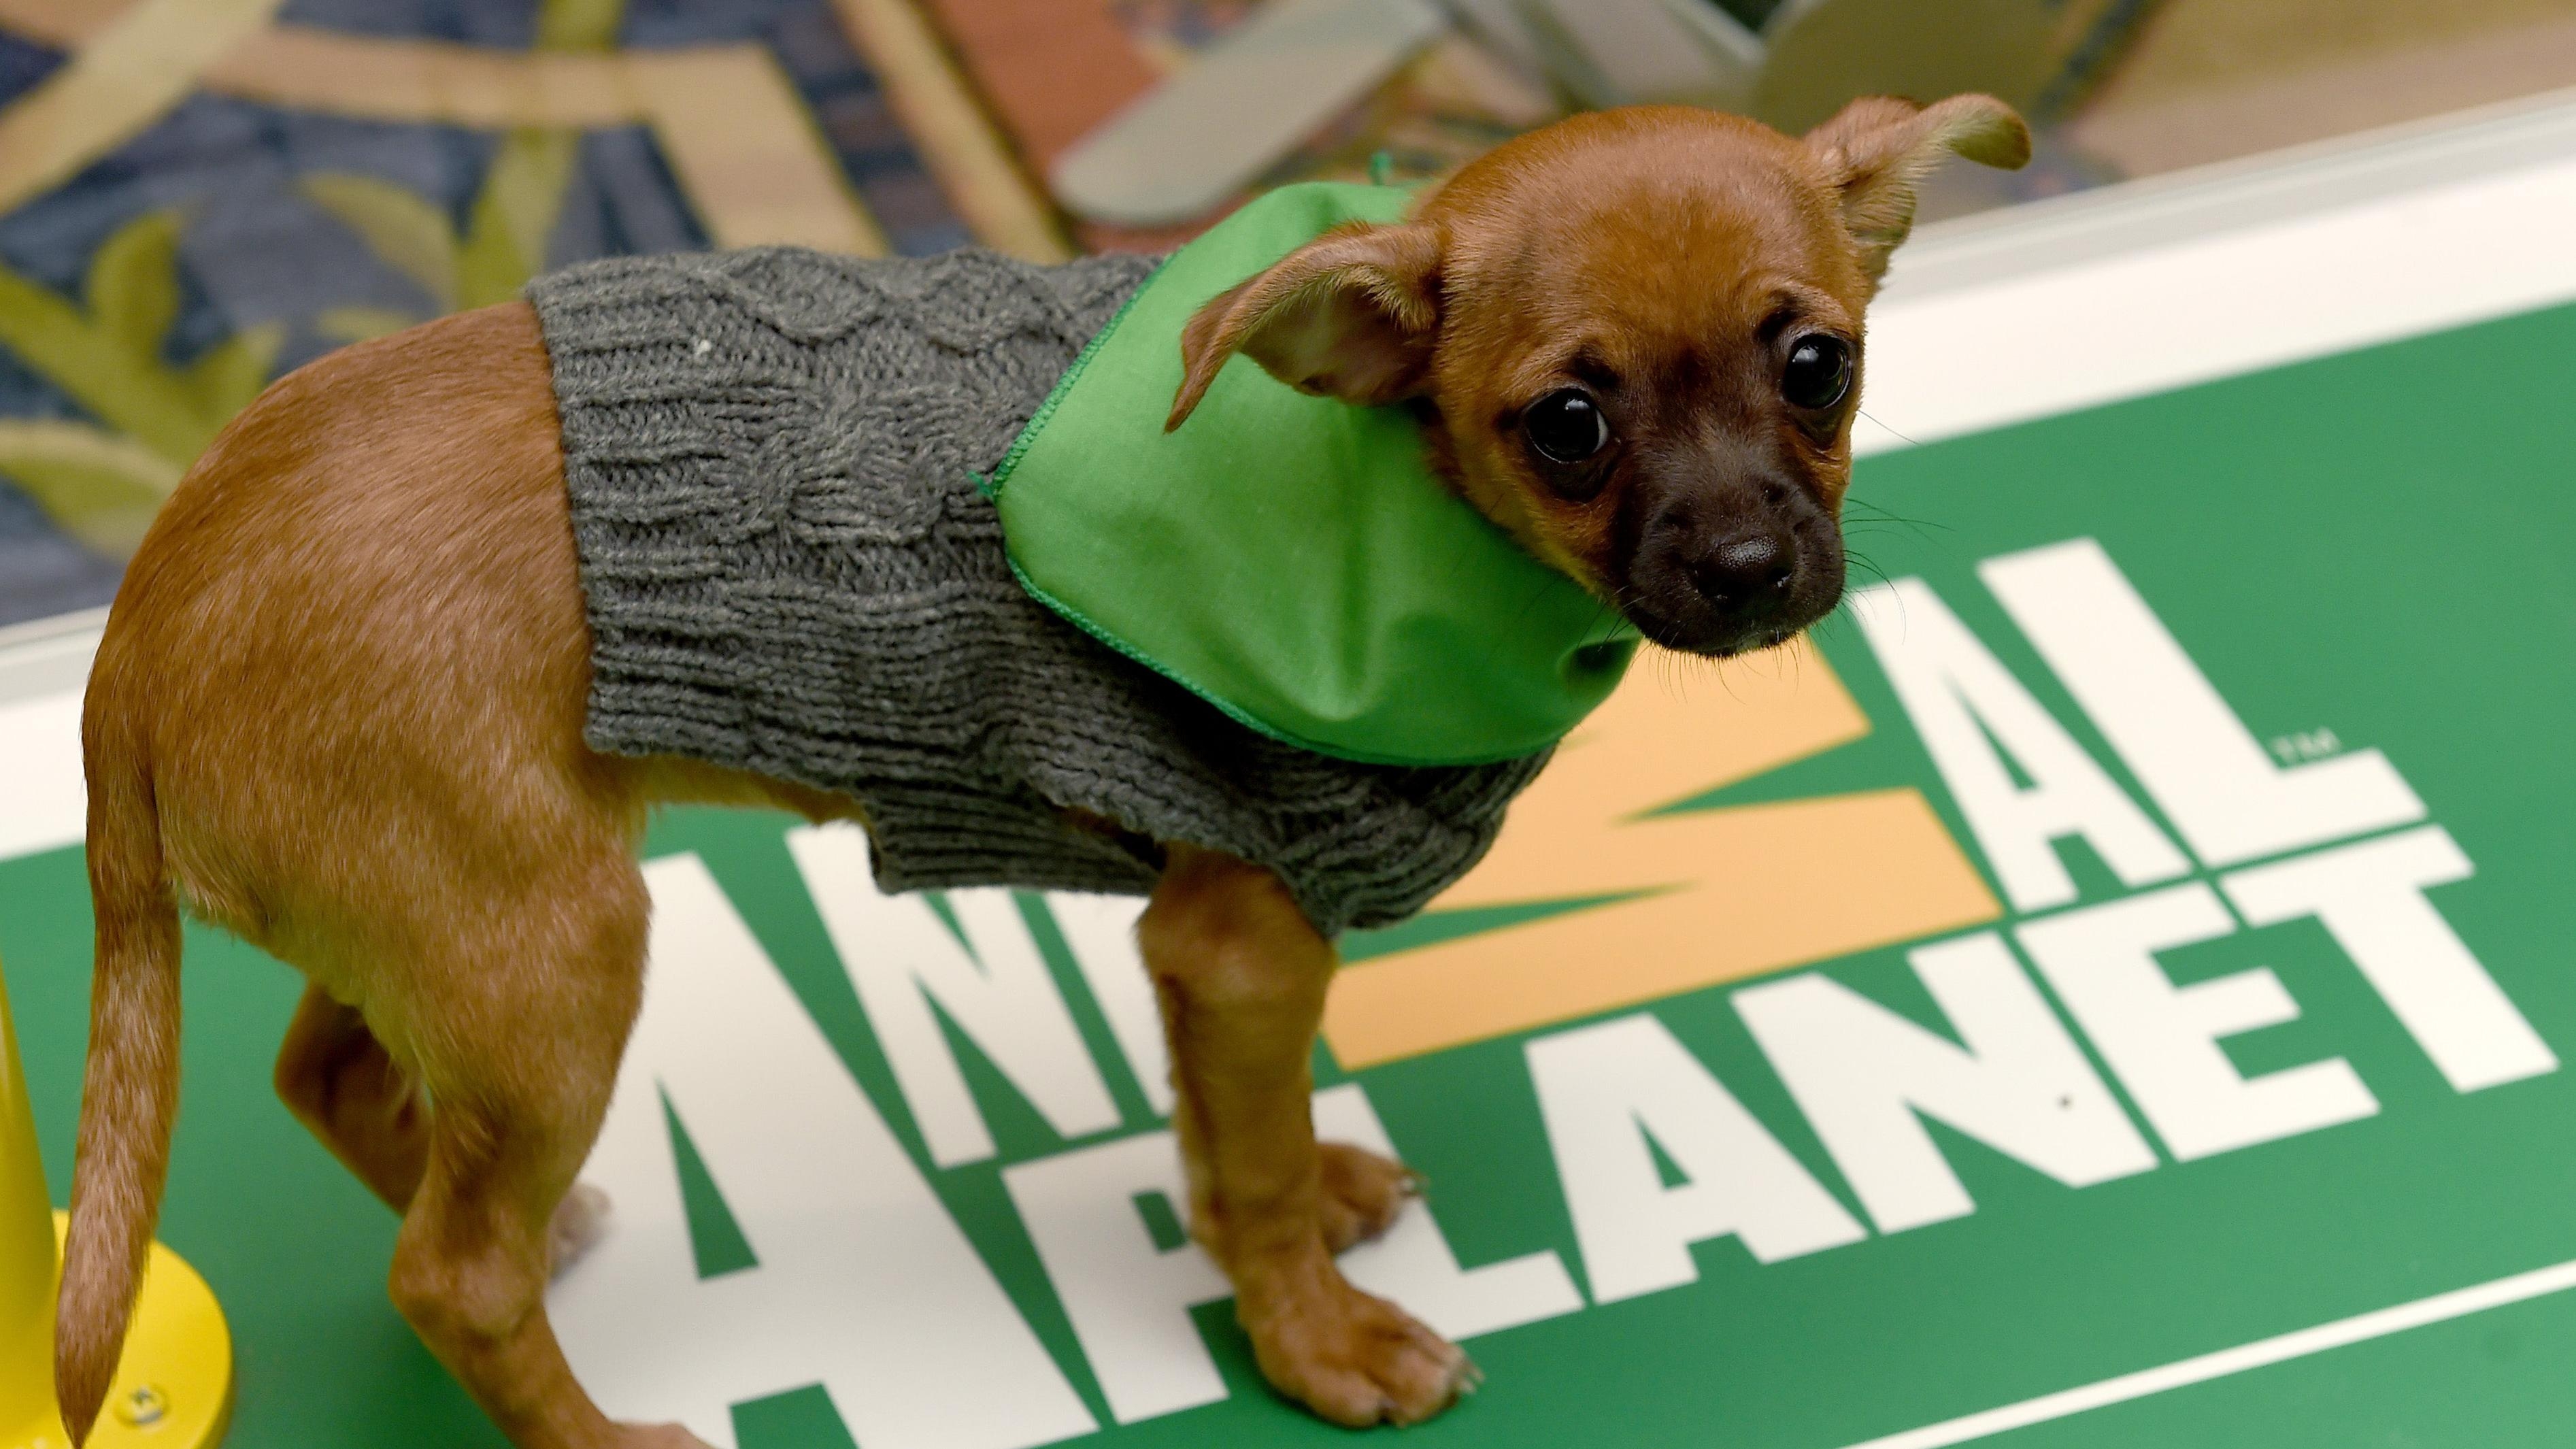 Here’s what you need to know about Puppy Bowl 2022